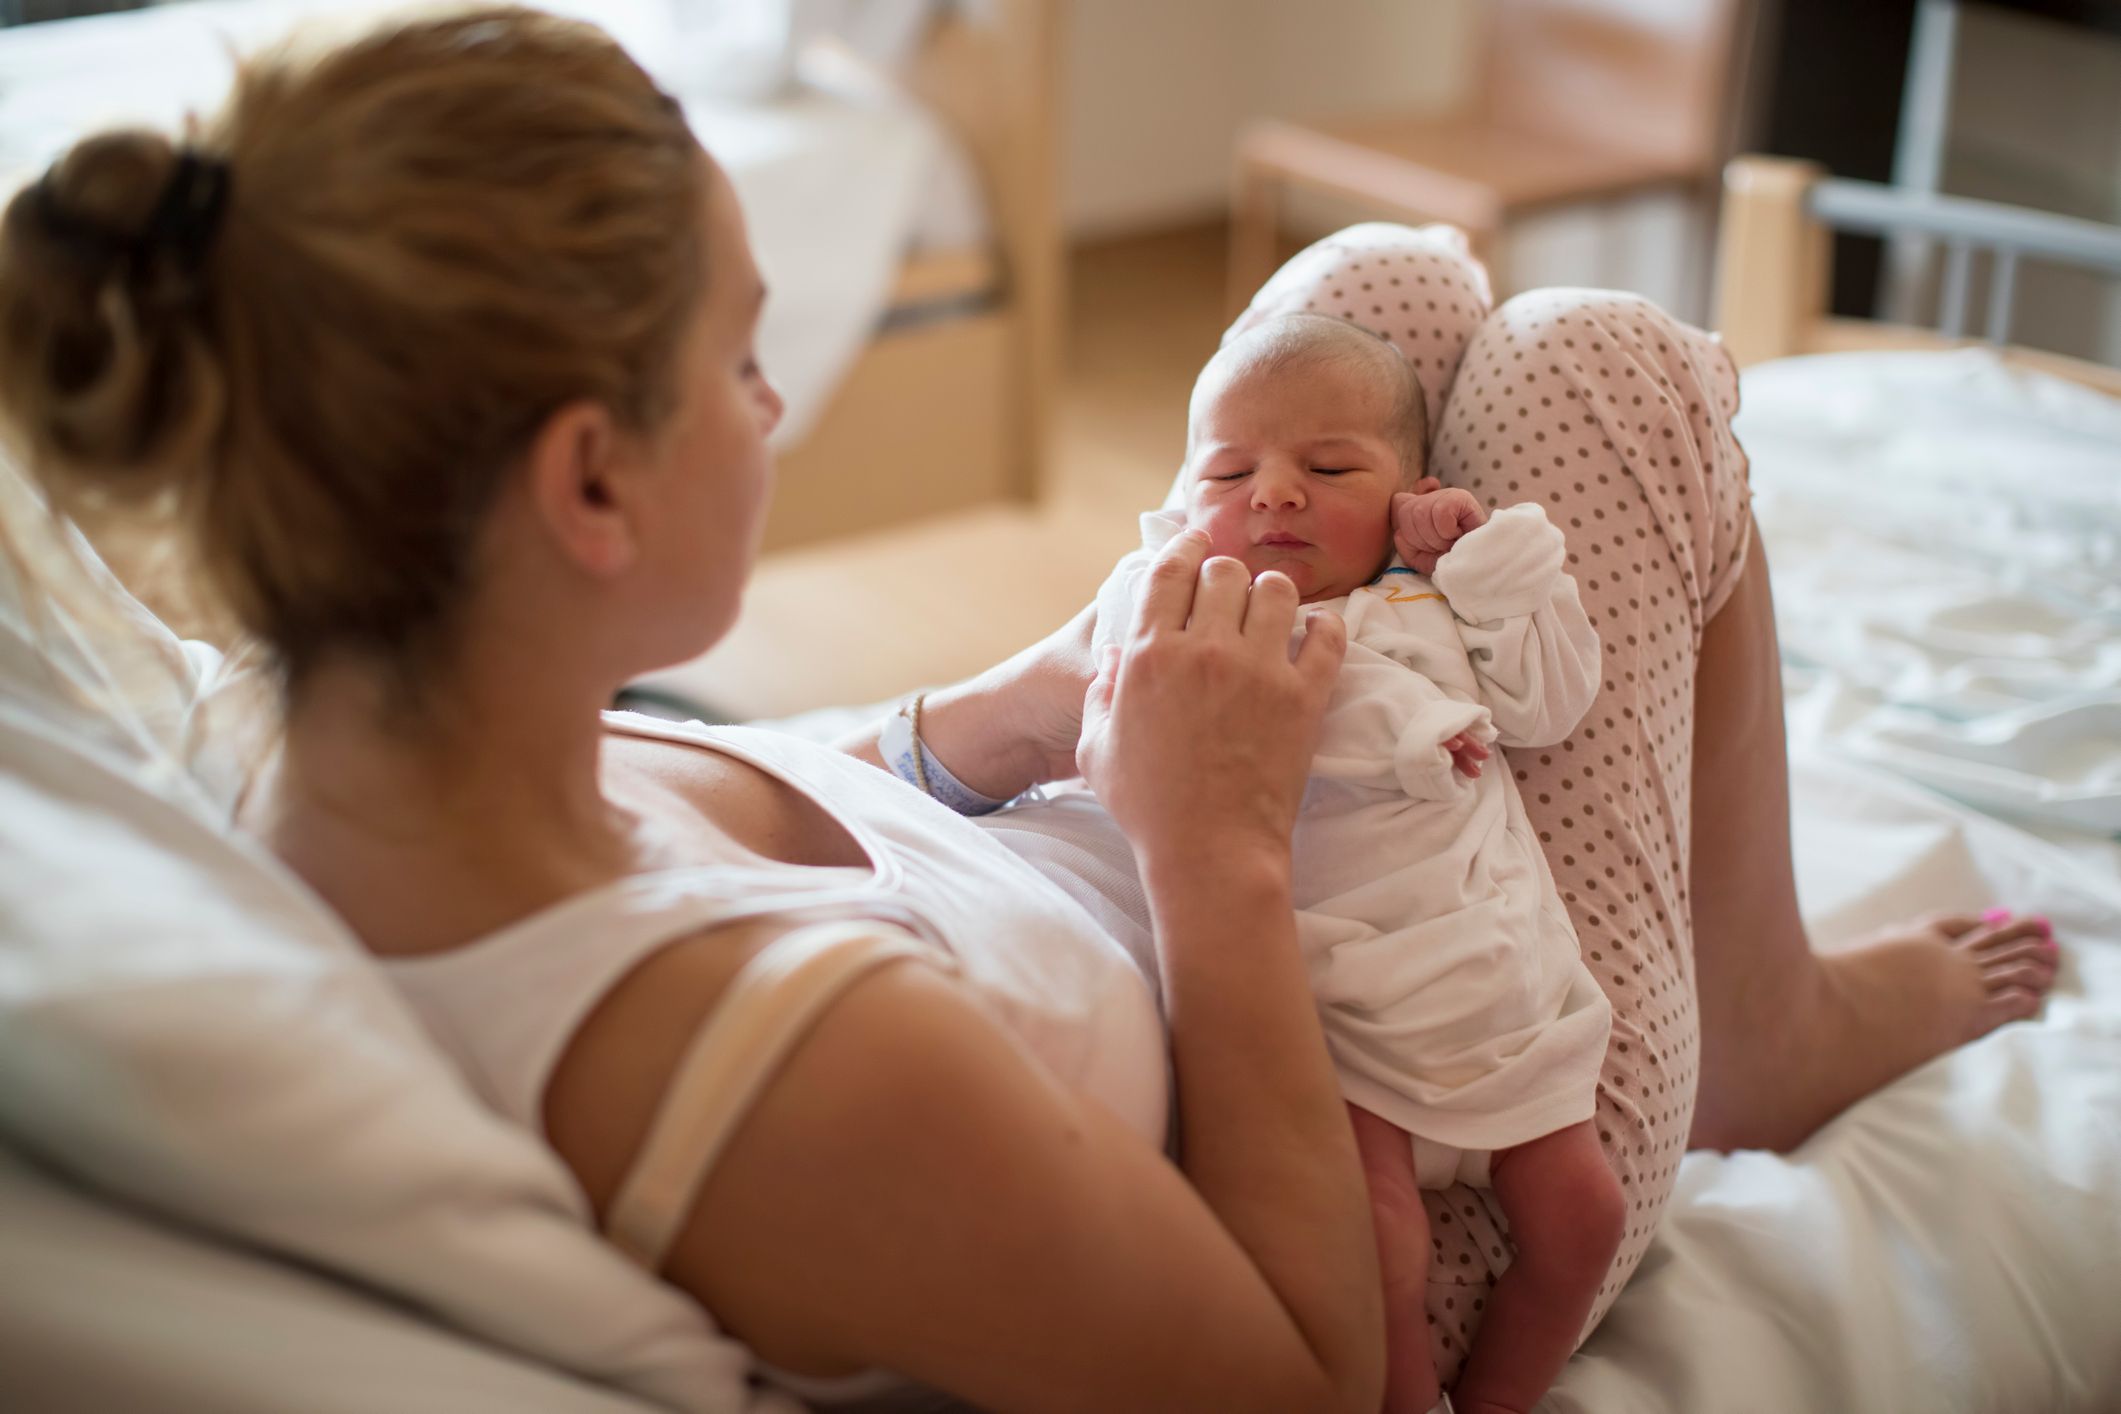 A mother and her newborn child in a room. | Source: Shutterstock